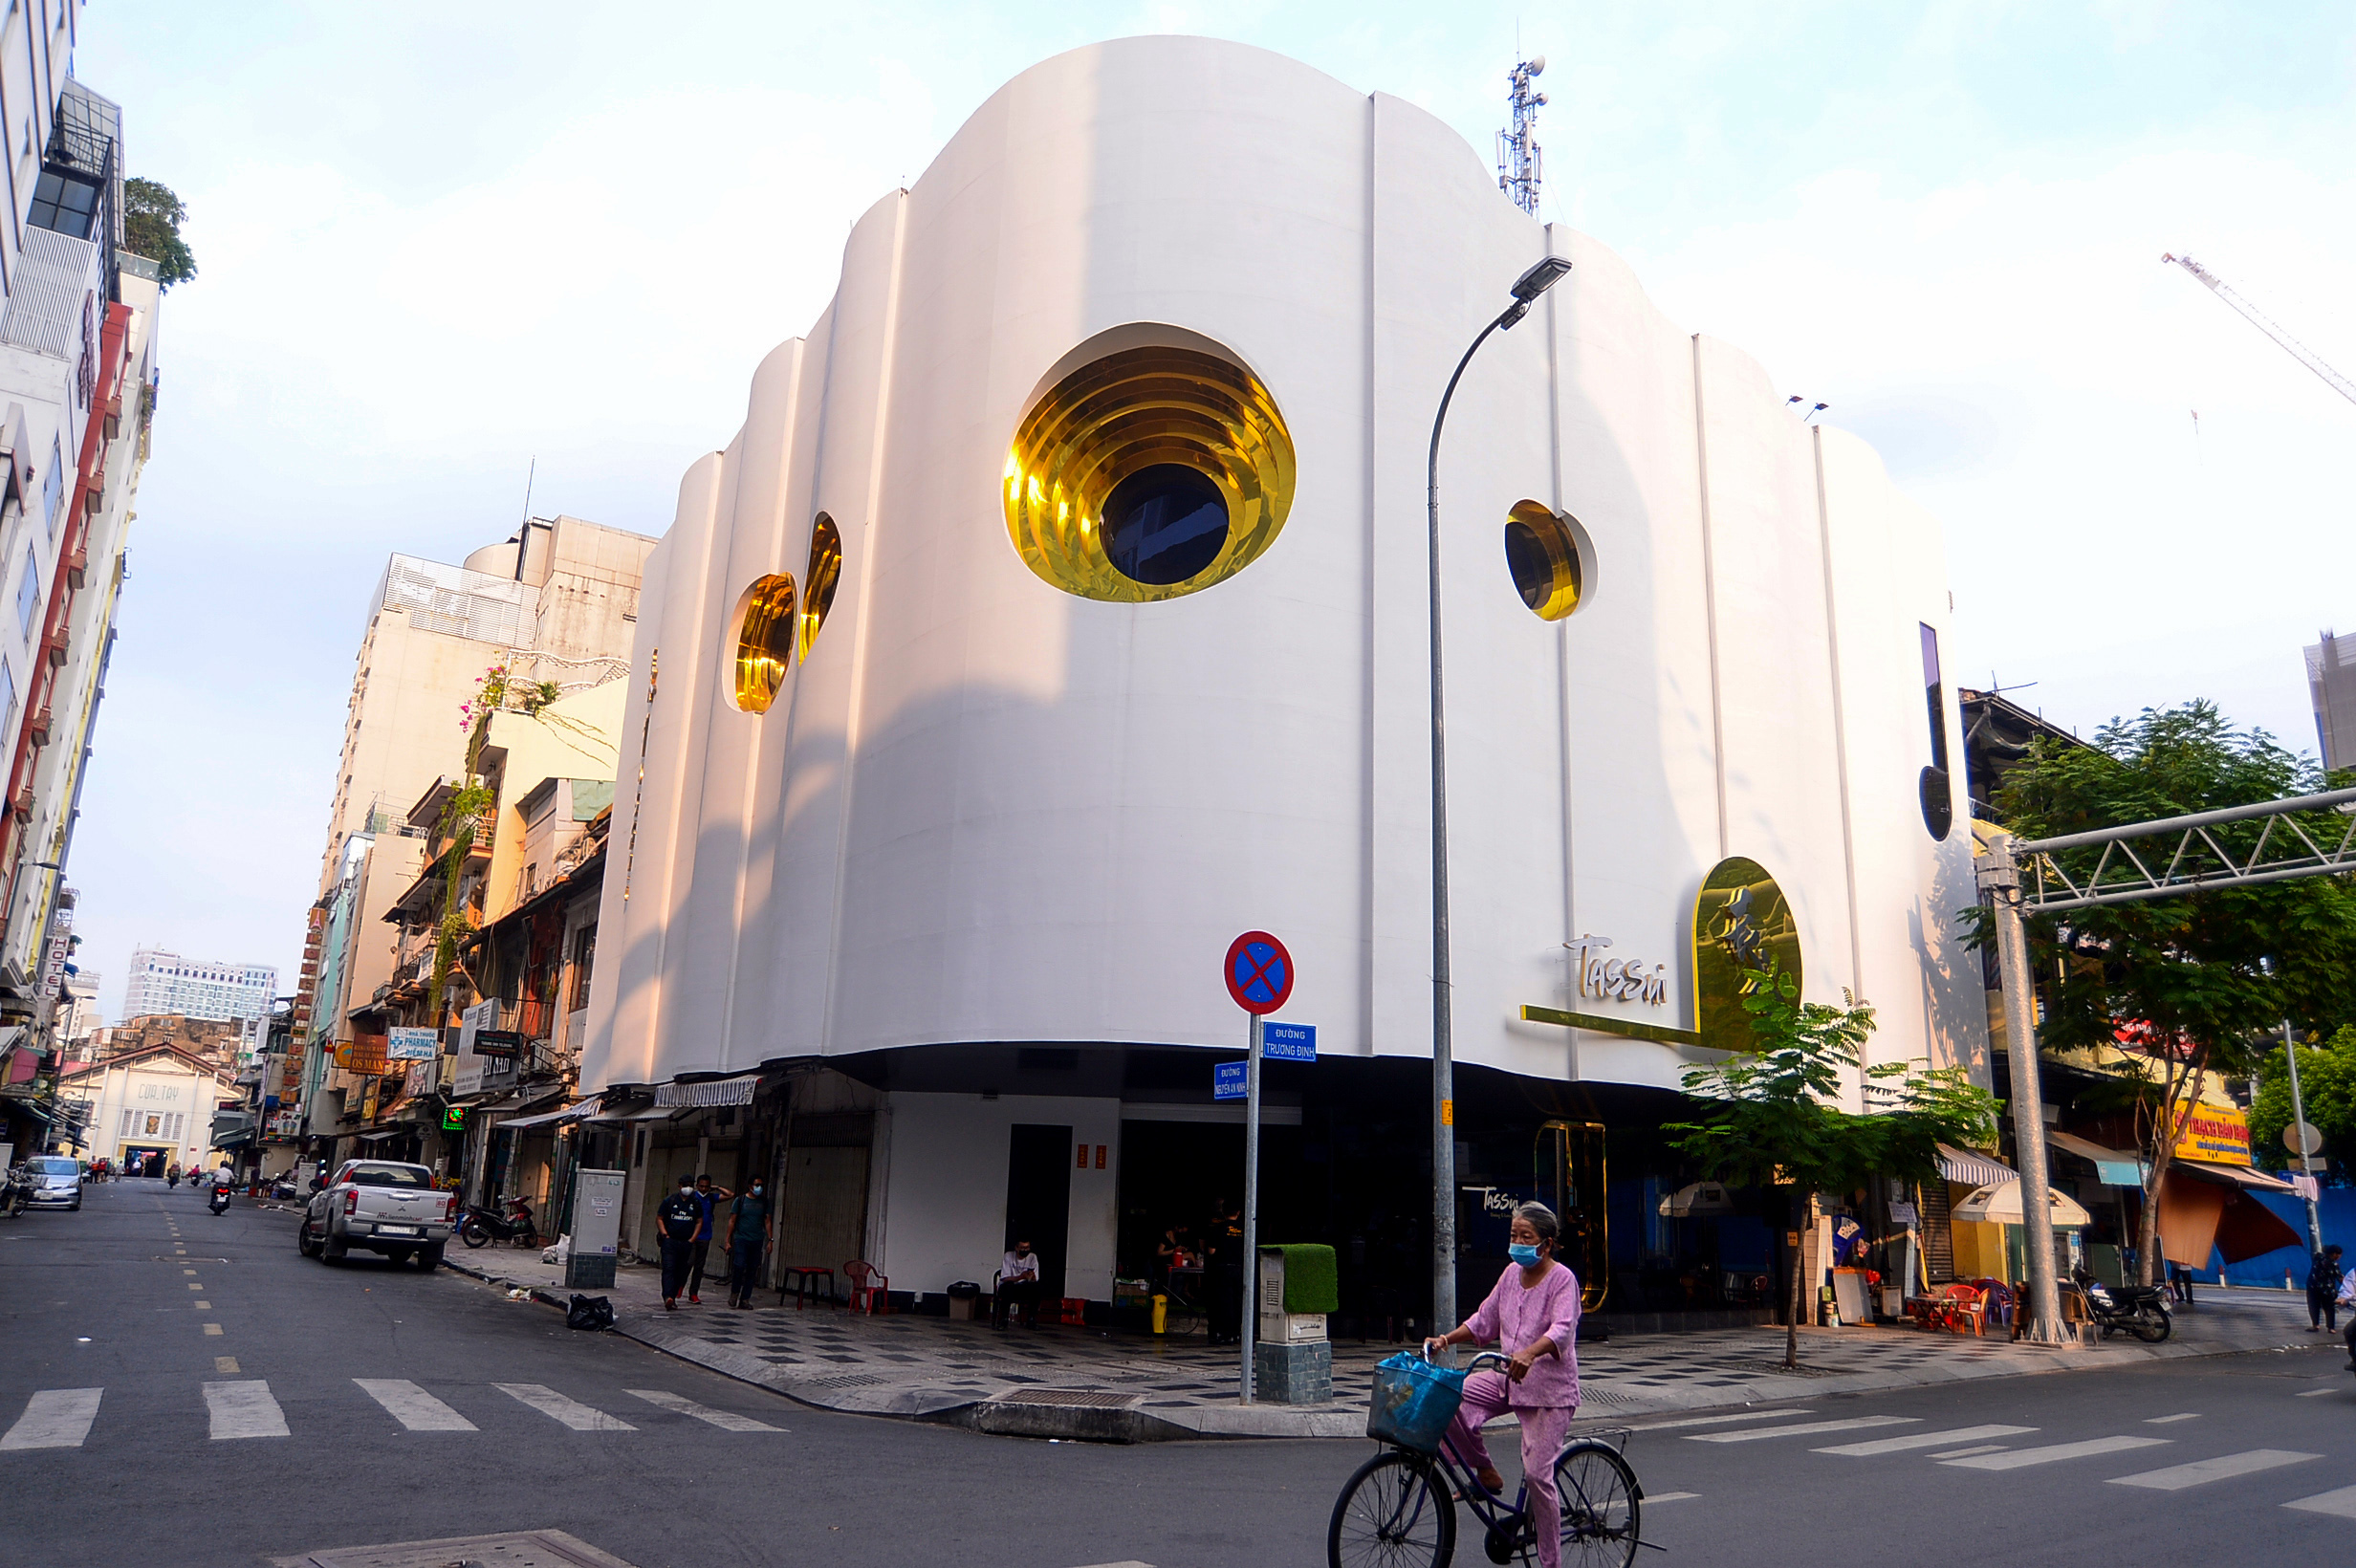 A new store is established at the corner of Nguyen An Ninh and Truong Dinh Streets in District 1, Ho Chi Minh City, February 2022. Photo: Quang Dinh / Tuoi Tre